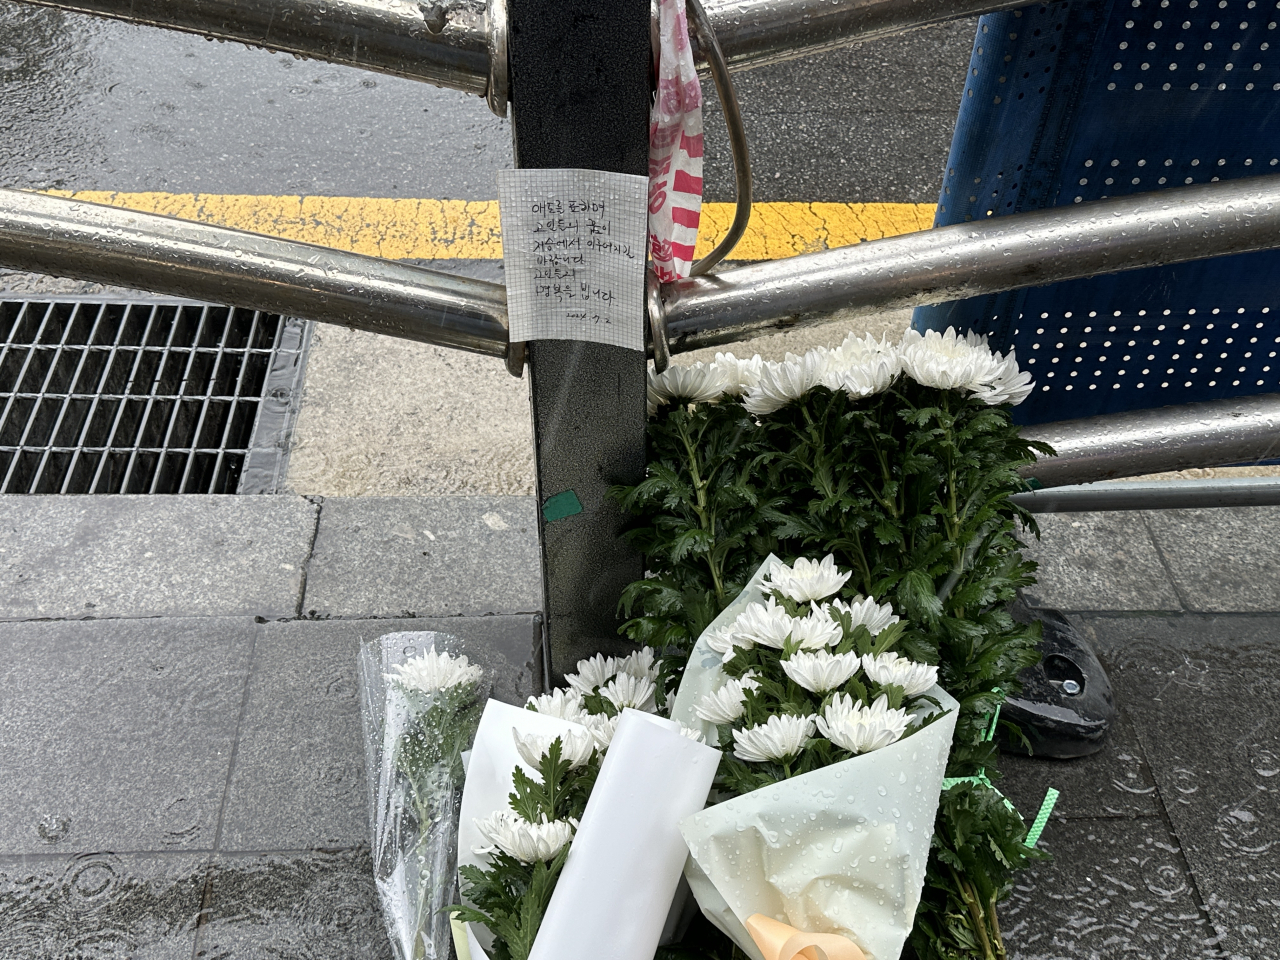 Bouquets of white chrysanthemums with a commemorative note are laid near Exit No. 7 of City Hall Station, Tuesday, the morning after a deadly car crash that resulted in nine casualties. The note reads: “I offer my condolences and hopes for the victims’ dreams to come true in heaven. May they rest in peace.” (Lee Jung-joo/The Korea Herald)